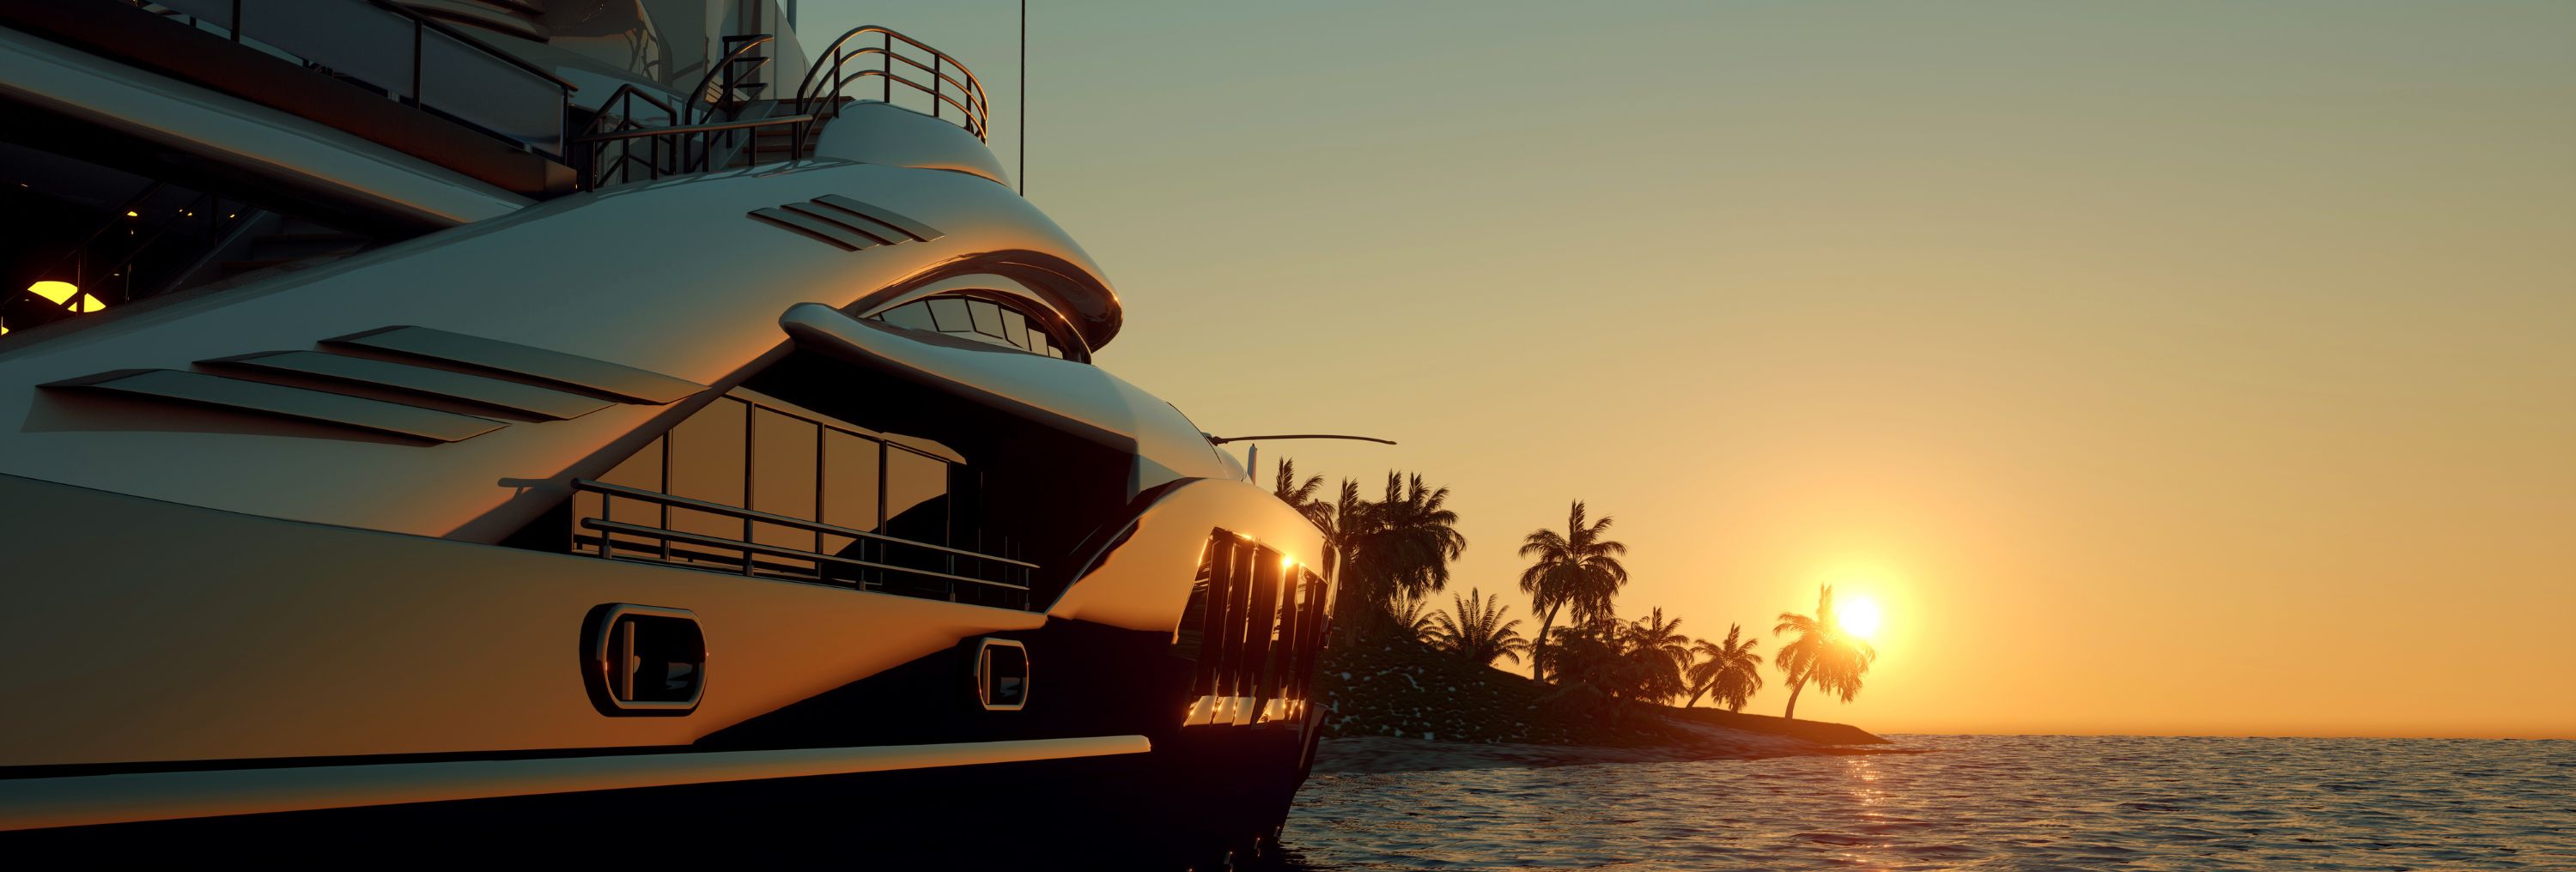 Why Should You Buy a Yacht?